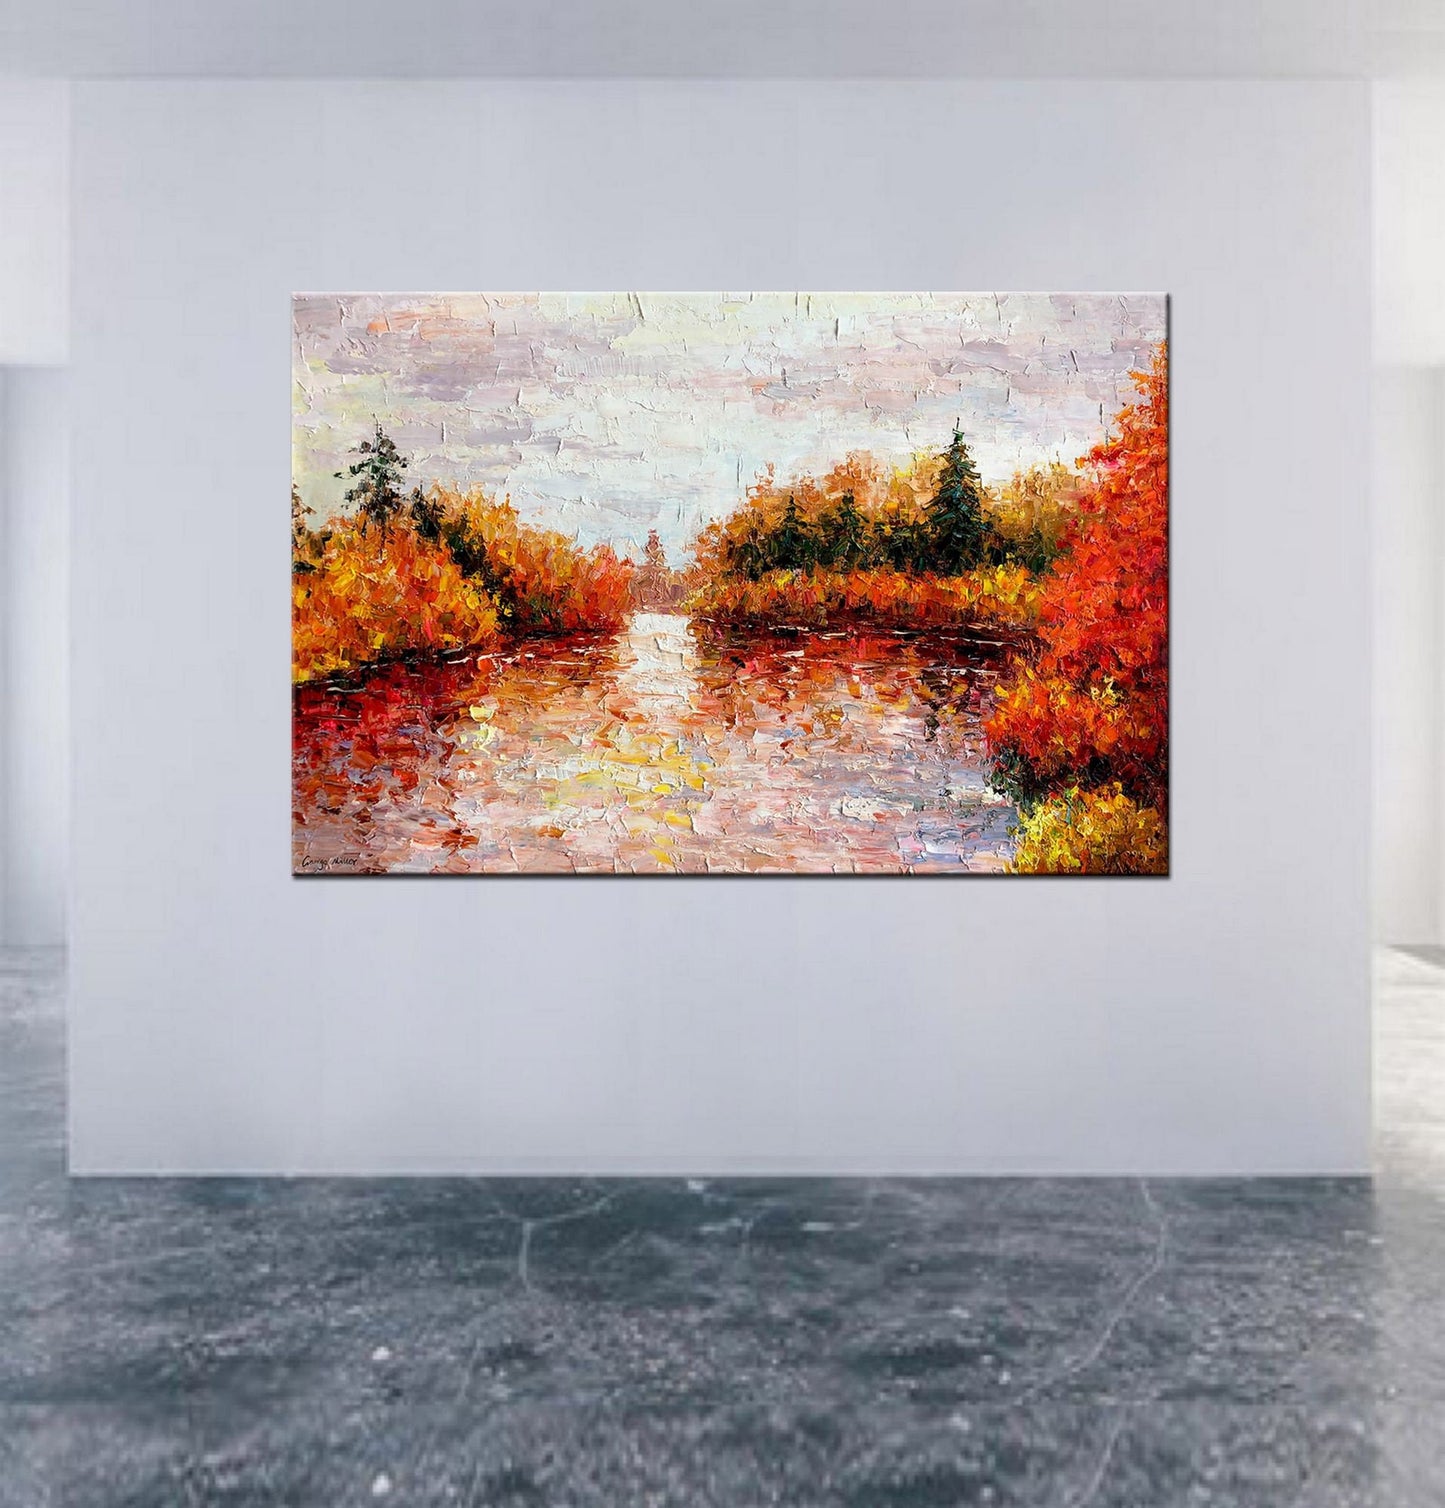 Oil Painting Landscape, Living Room Decor, Large Wall Art Painting, Autumn Landscape Painting, Palette Knife Painting, Modern Oil Painting